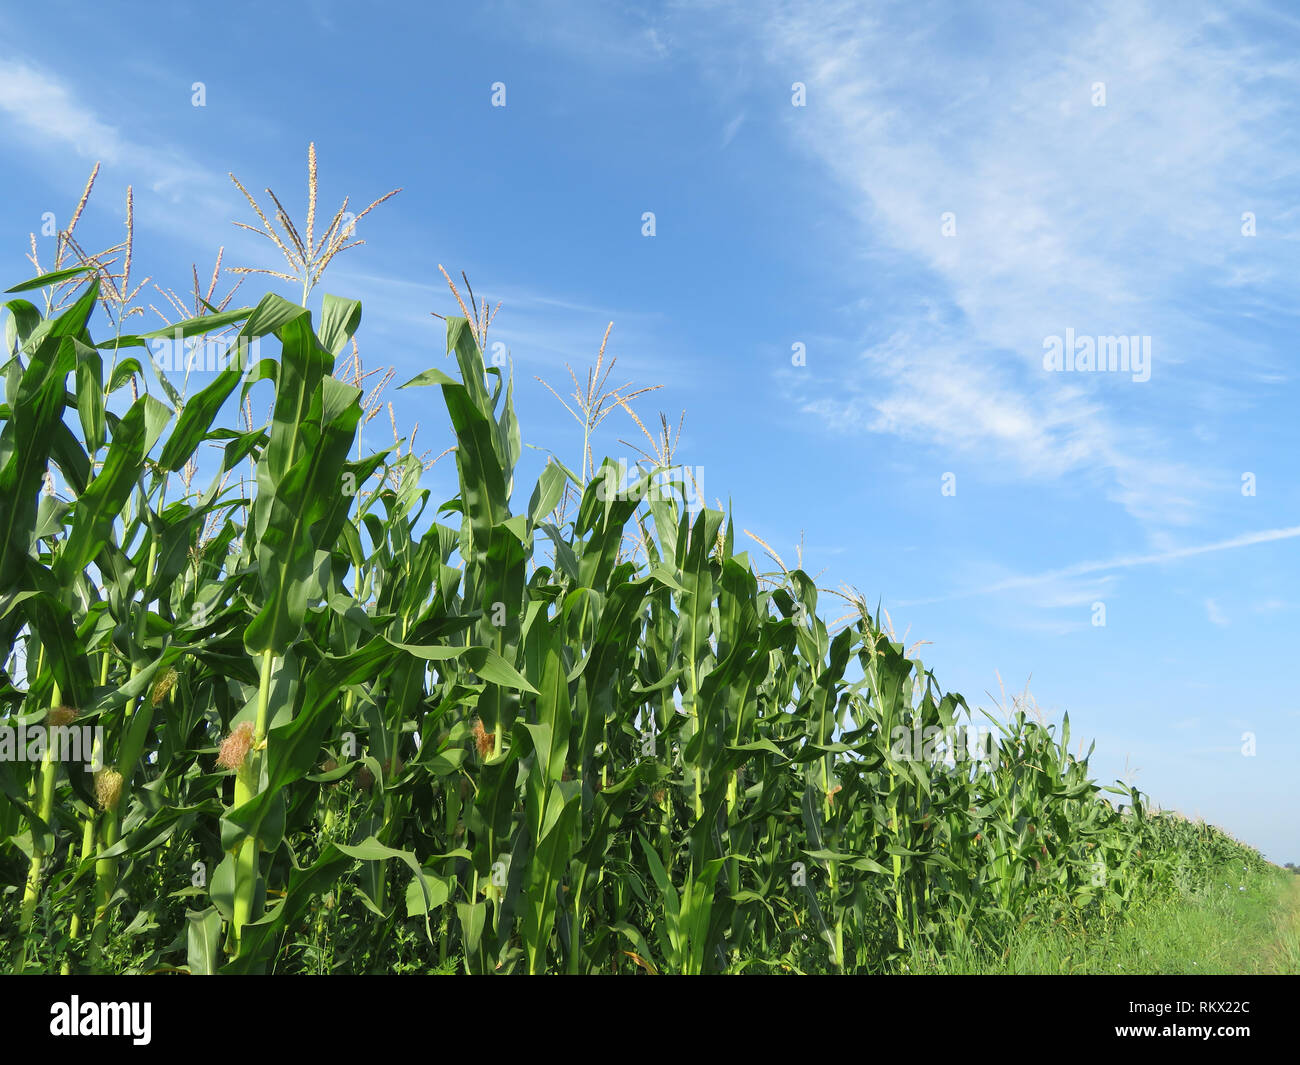 Green corn field and blue sky with white clouds. Corn stalks with young cobs Stock Photo